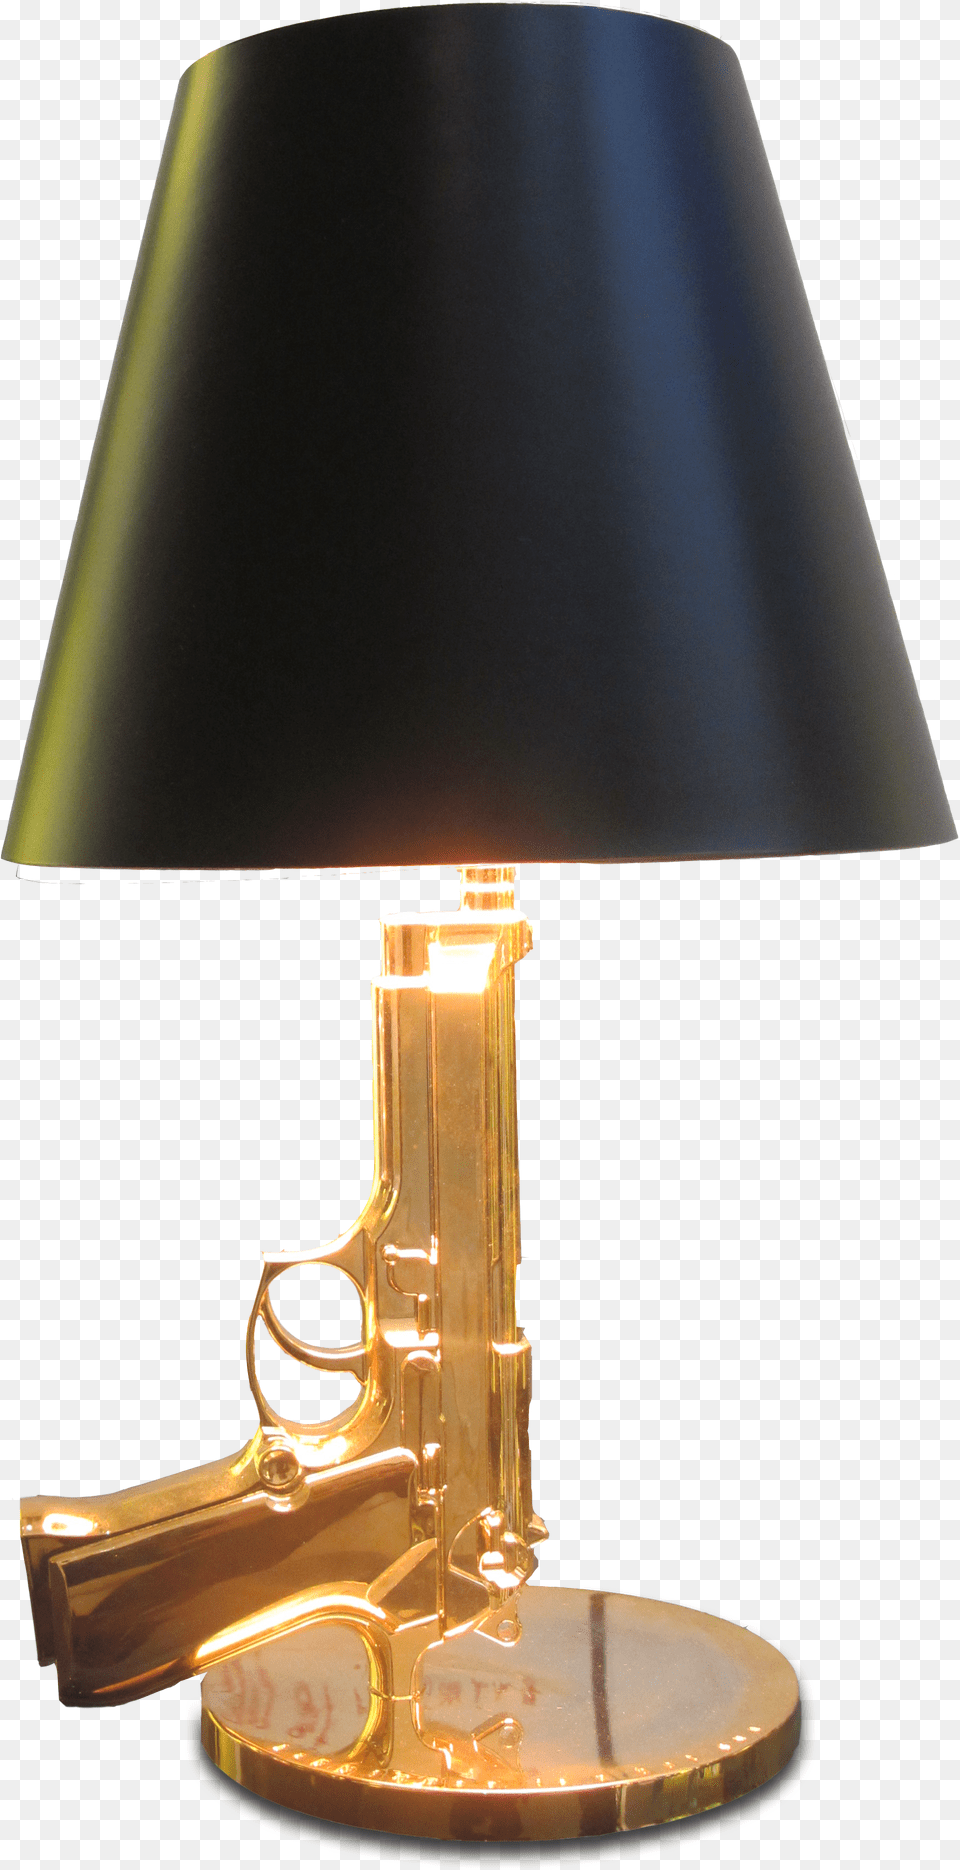 Lamp Side View Free Transparent Png